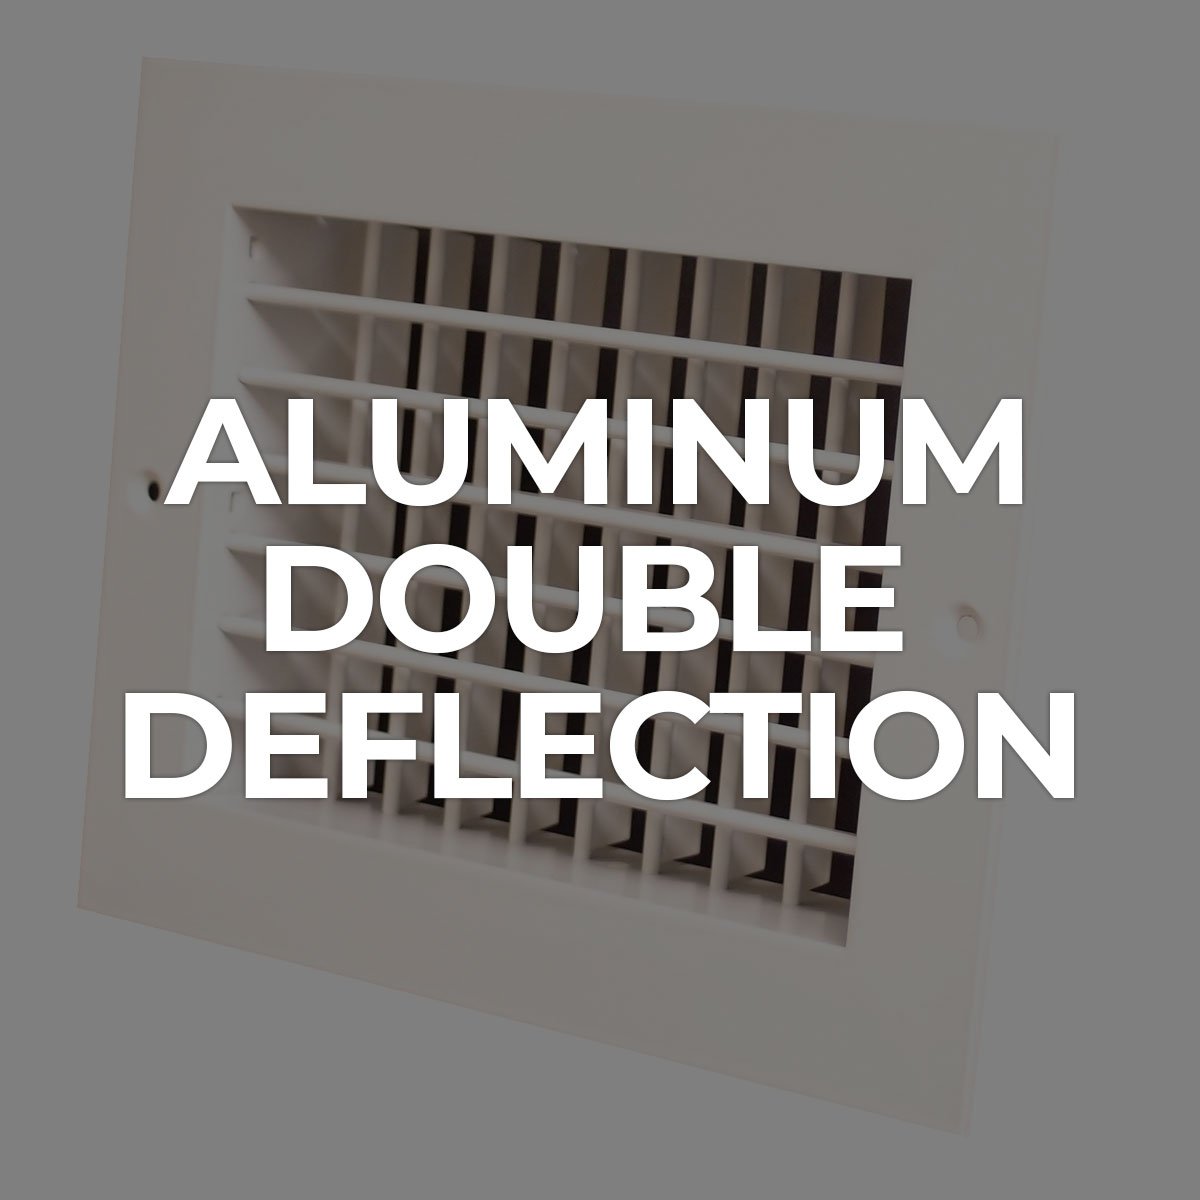 Search by Collections: Aluminum Double Deflection Supply Vent